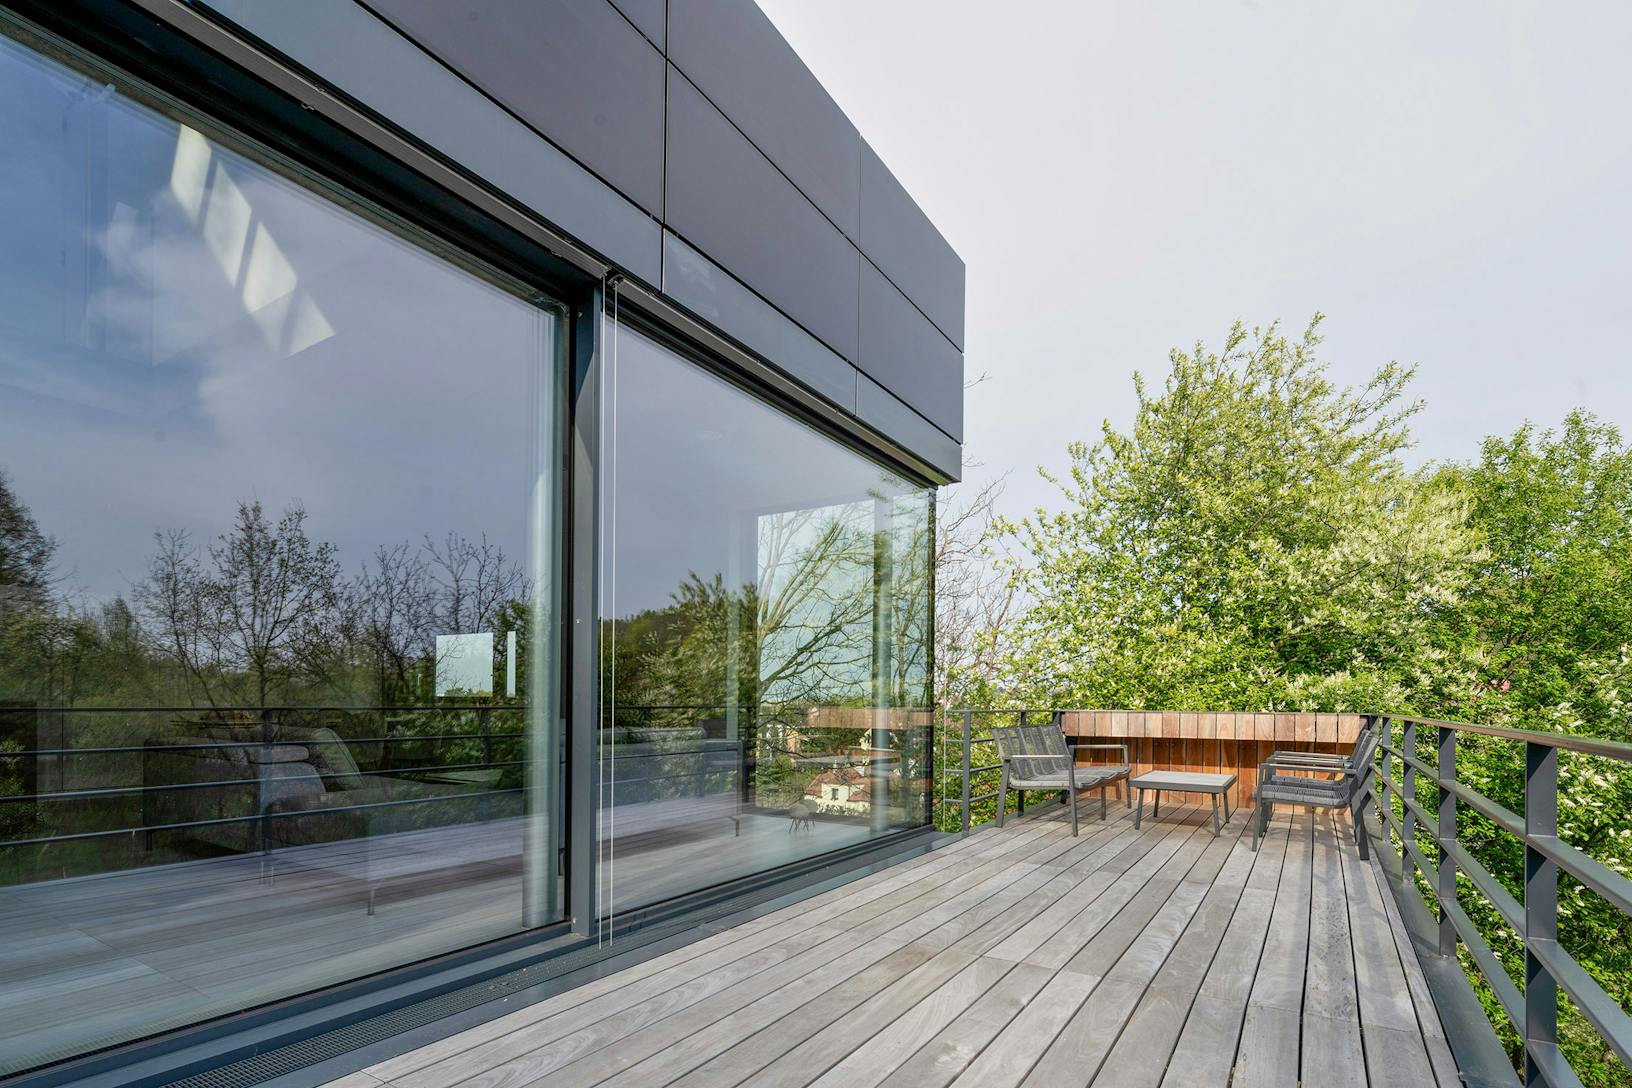 A modern house with a wooden deck and large sliding glass doors